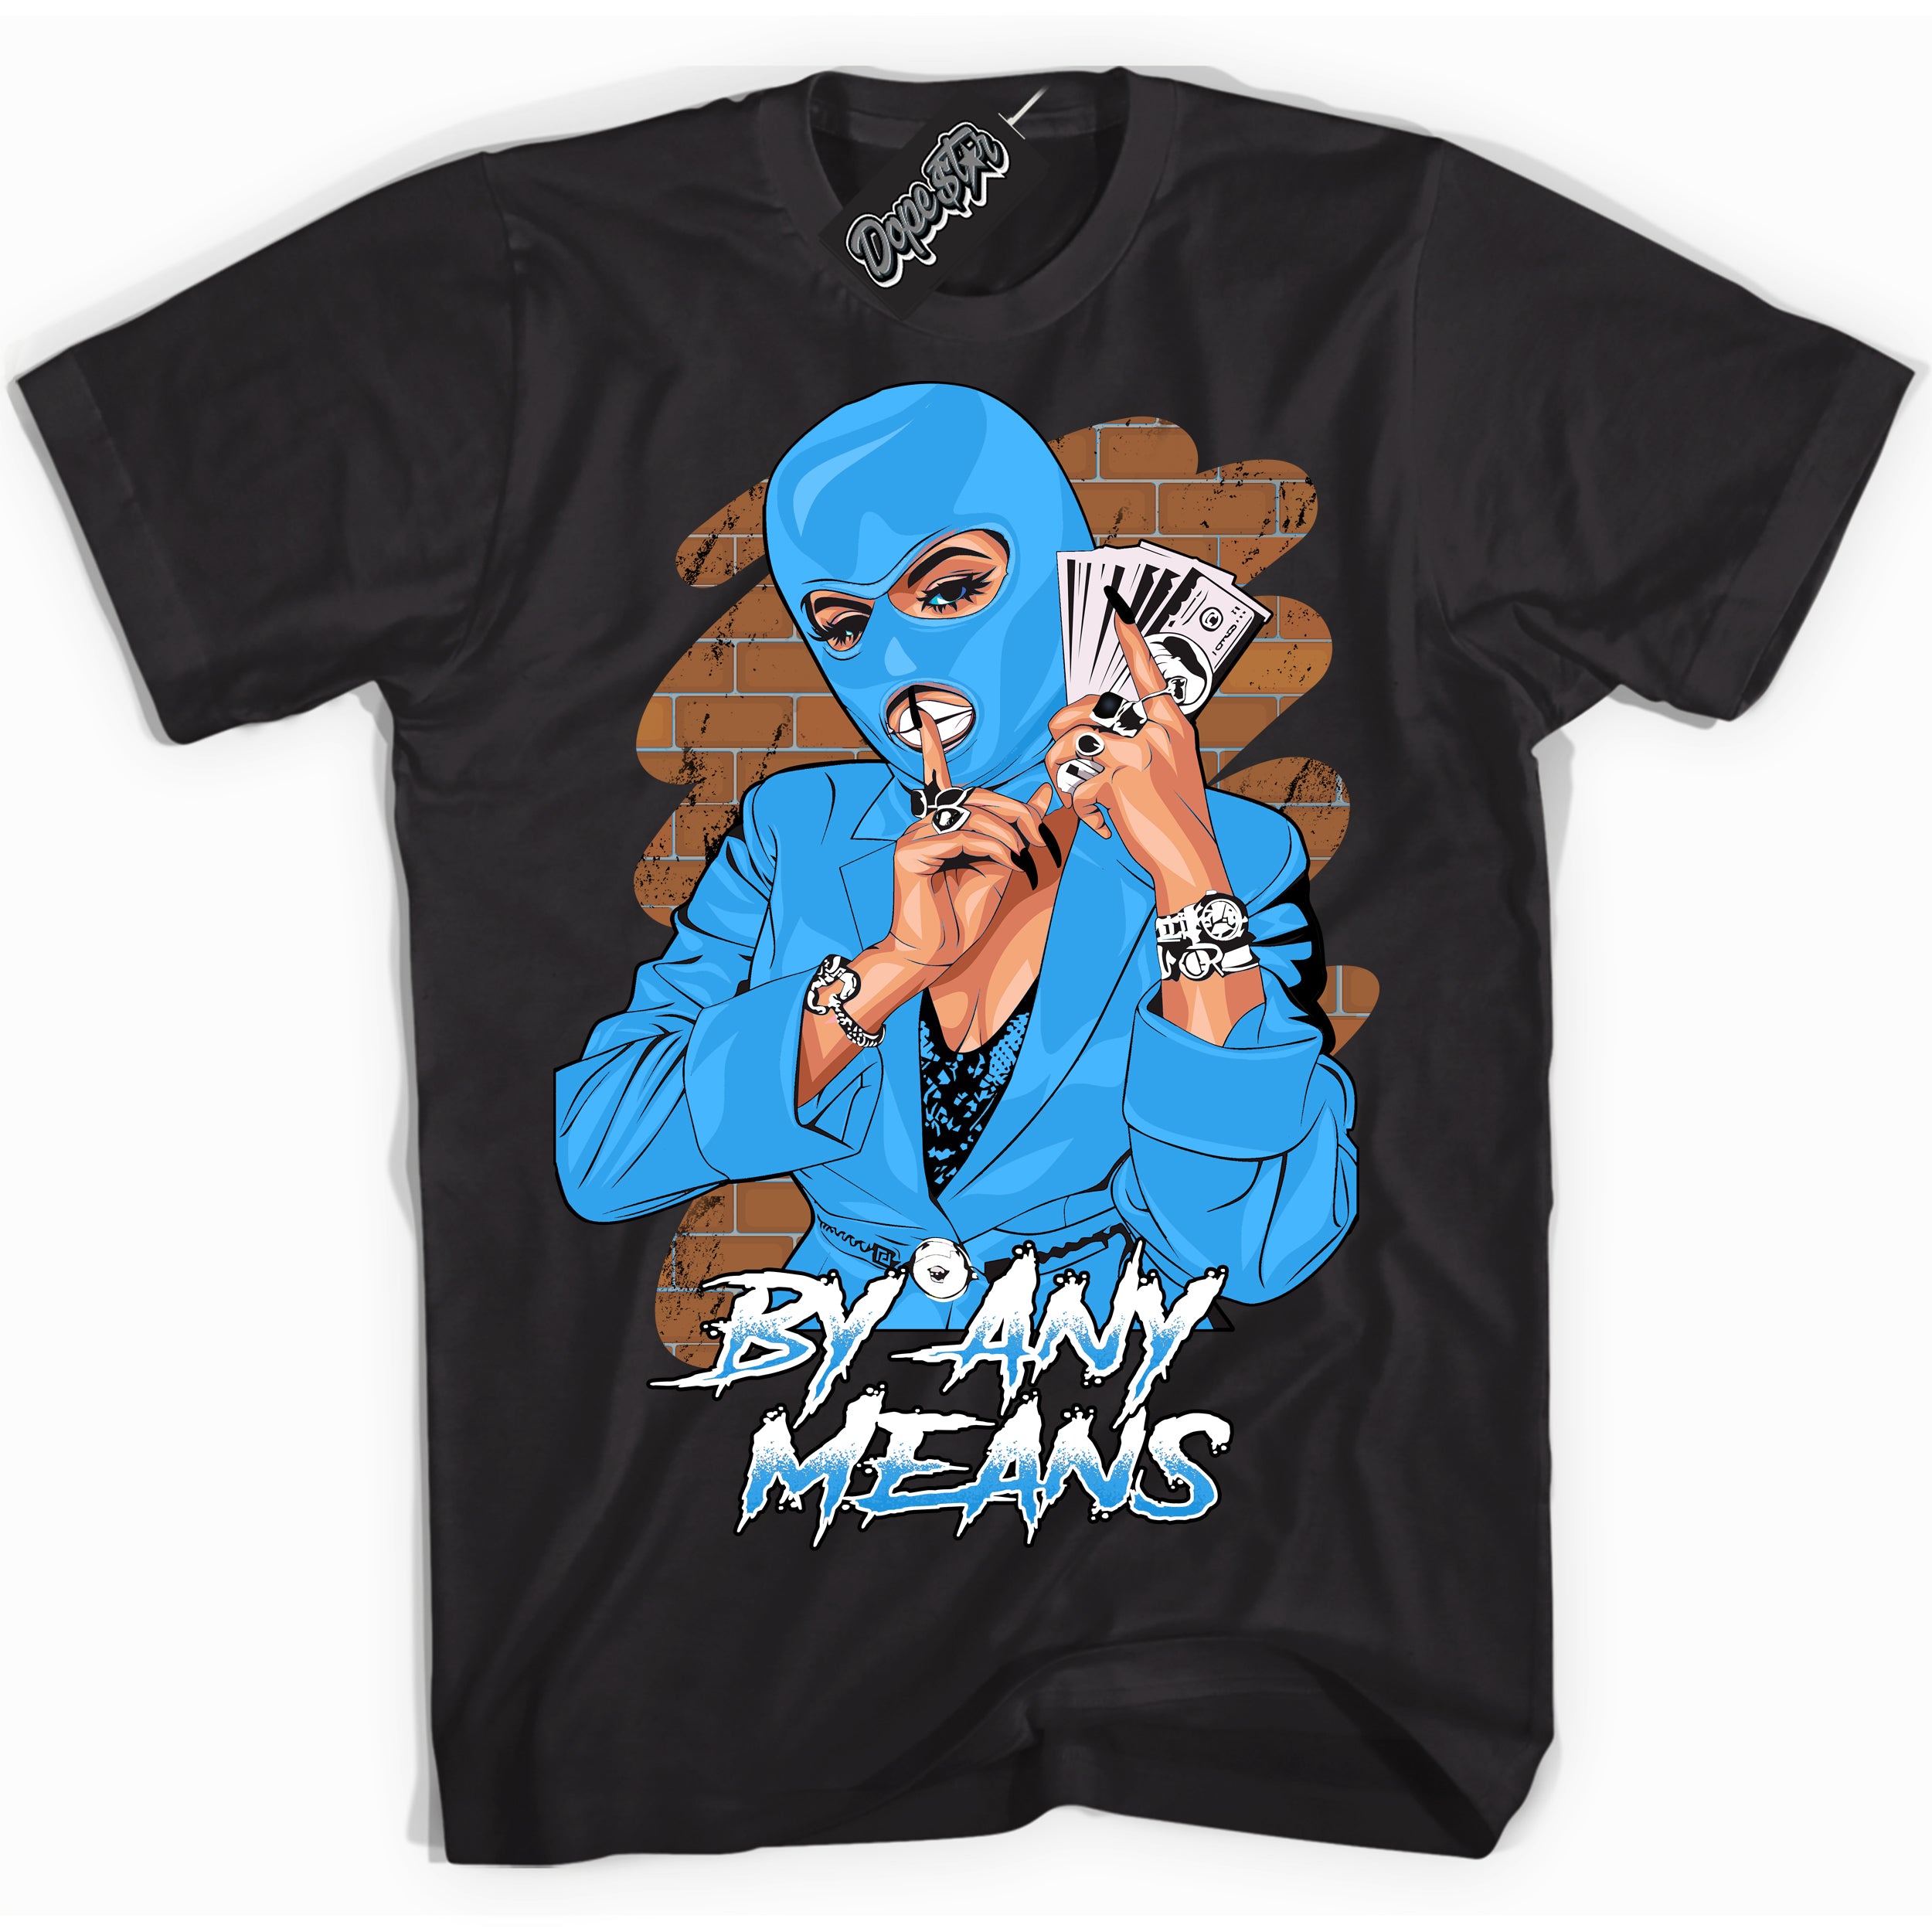 Cool Black graphic tee with “ By Any Means ” design, that perfectly matches Powder Blue 9s sneakers 